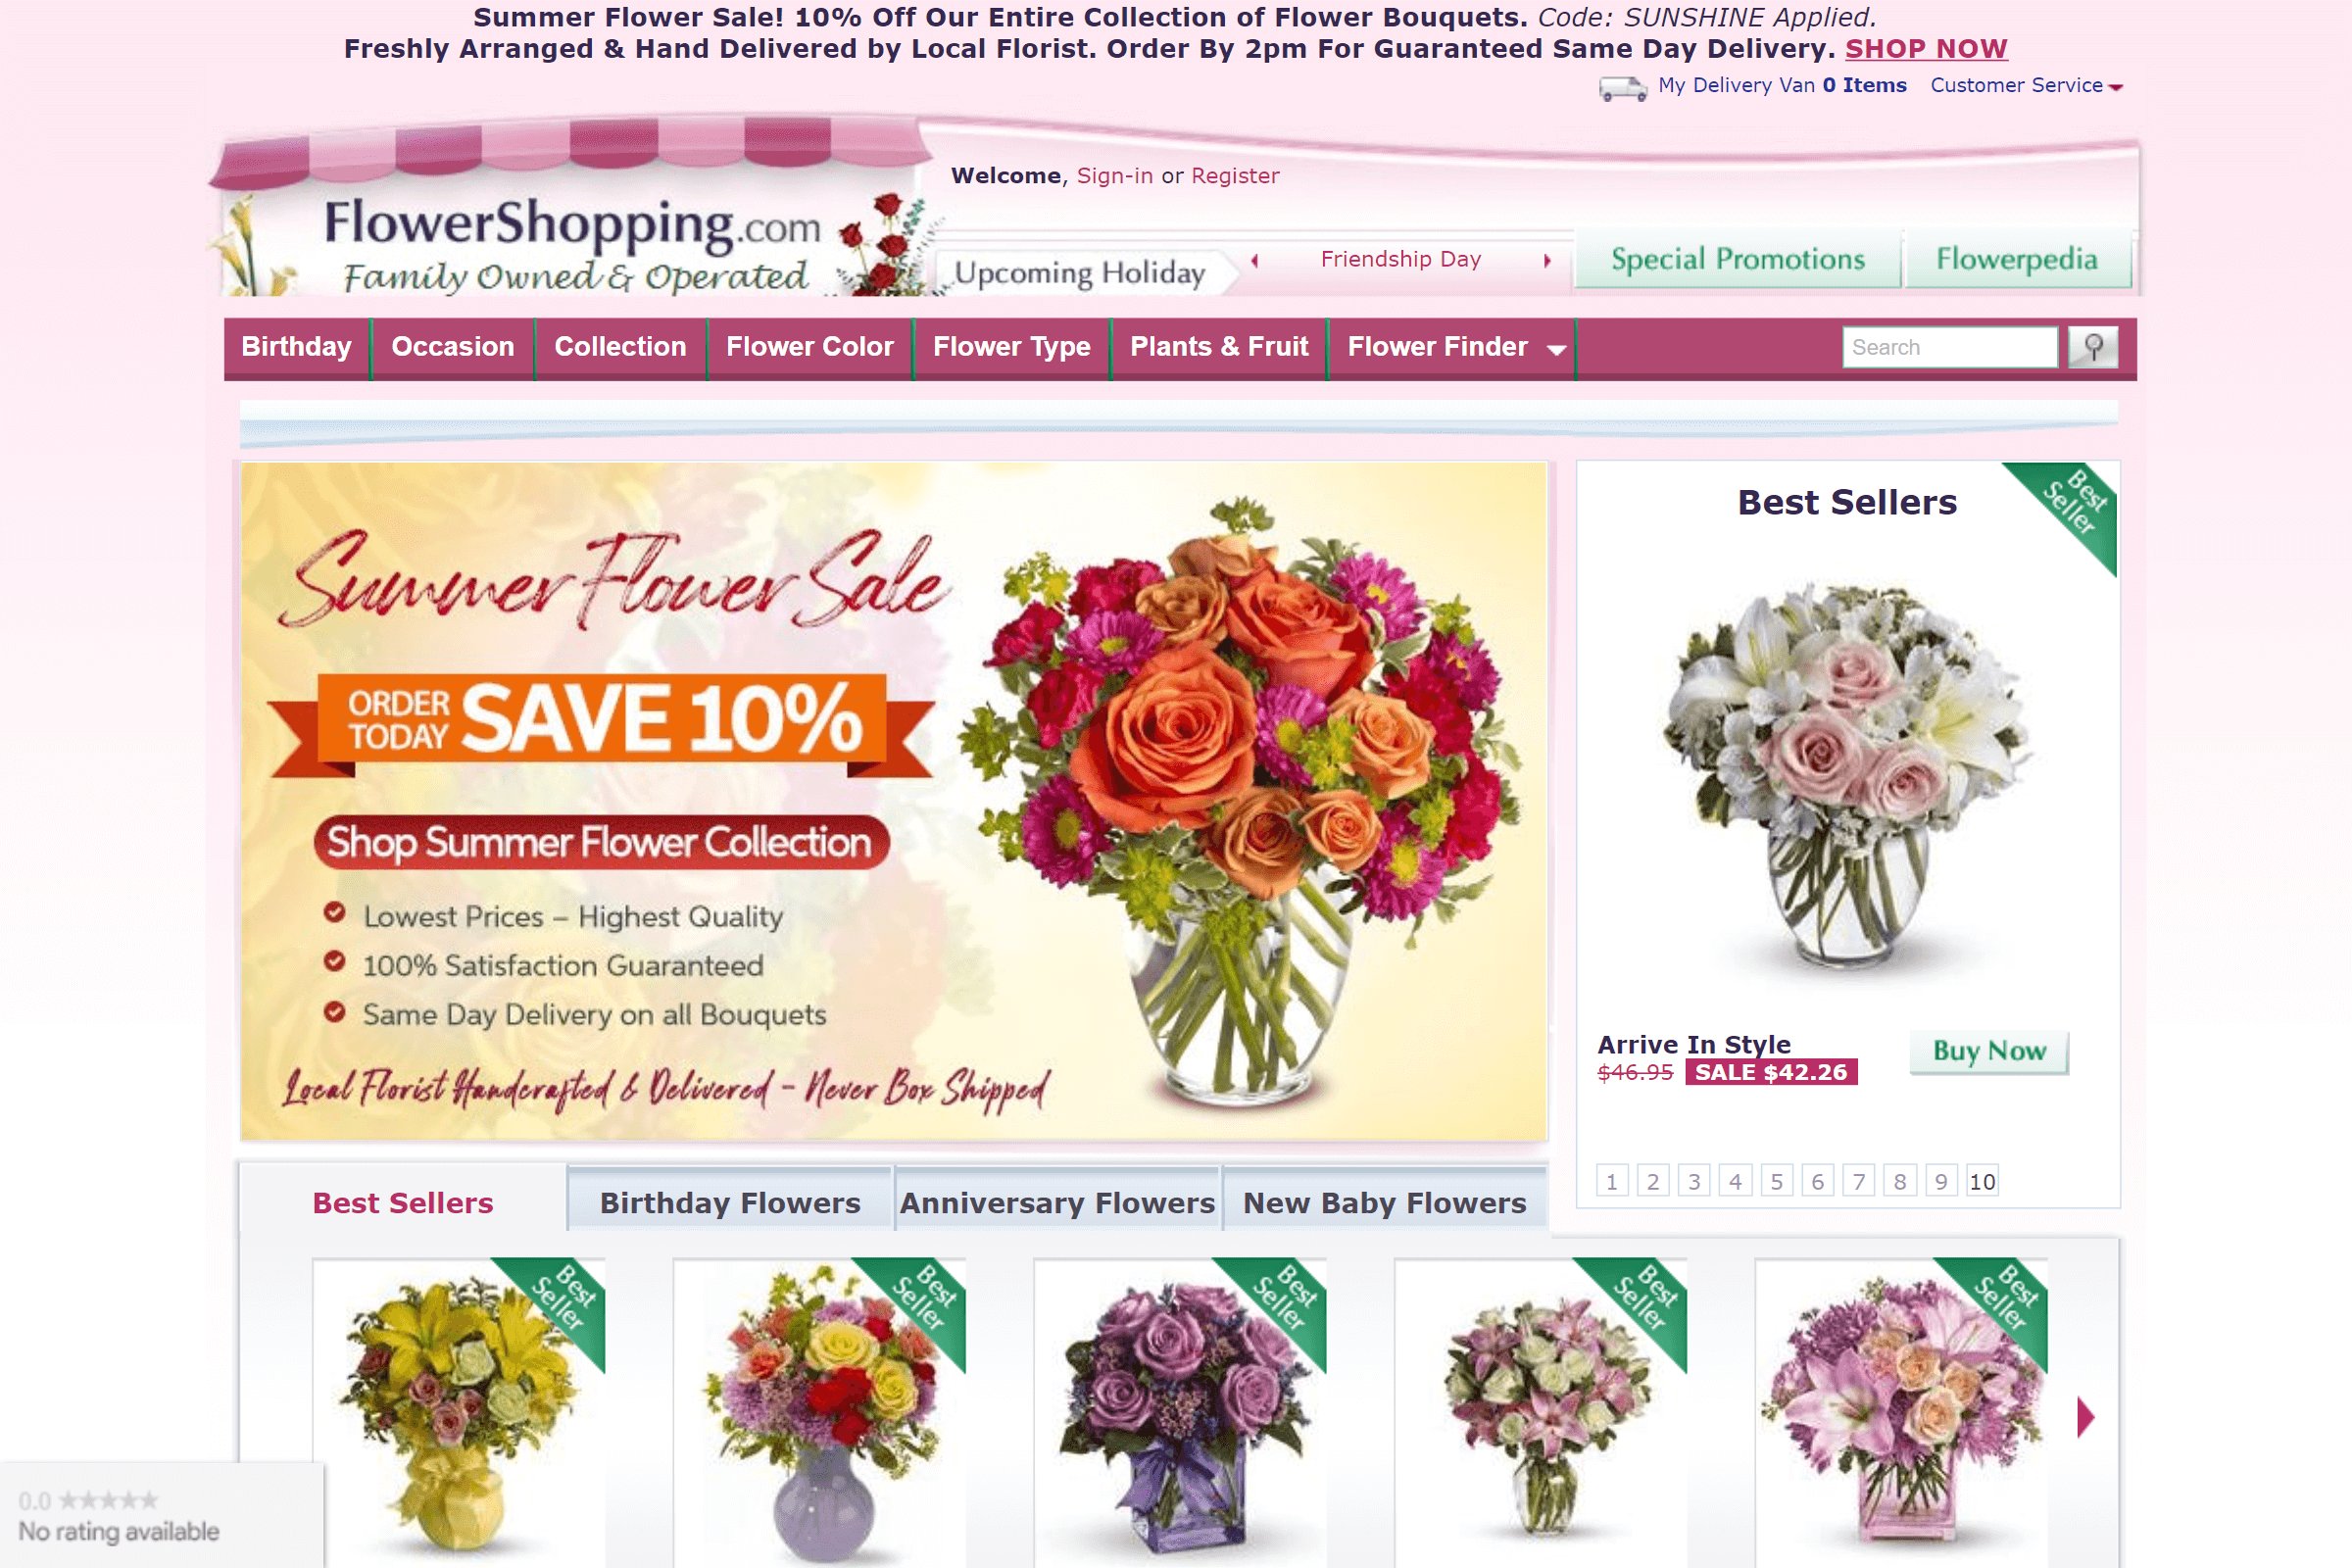 FlowerShopping on ReadSomeReviews